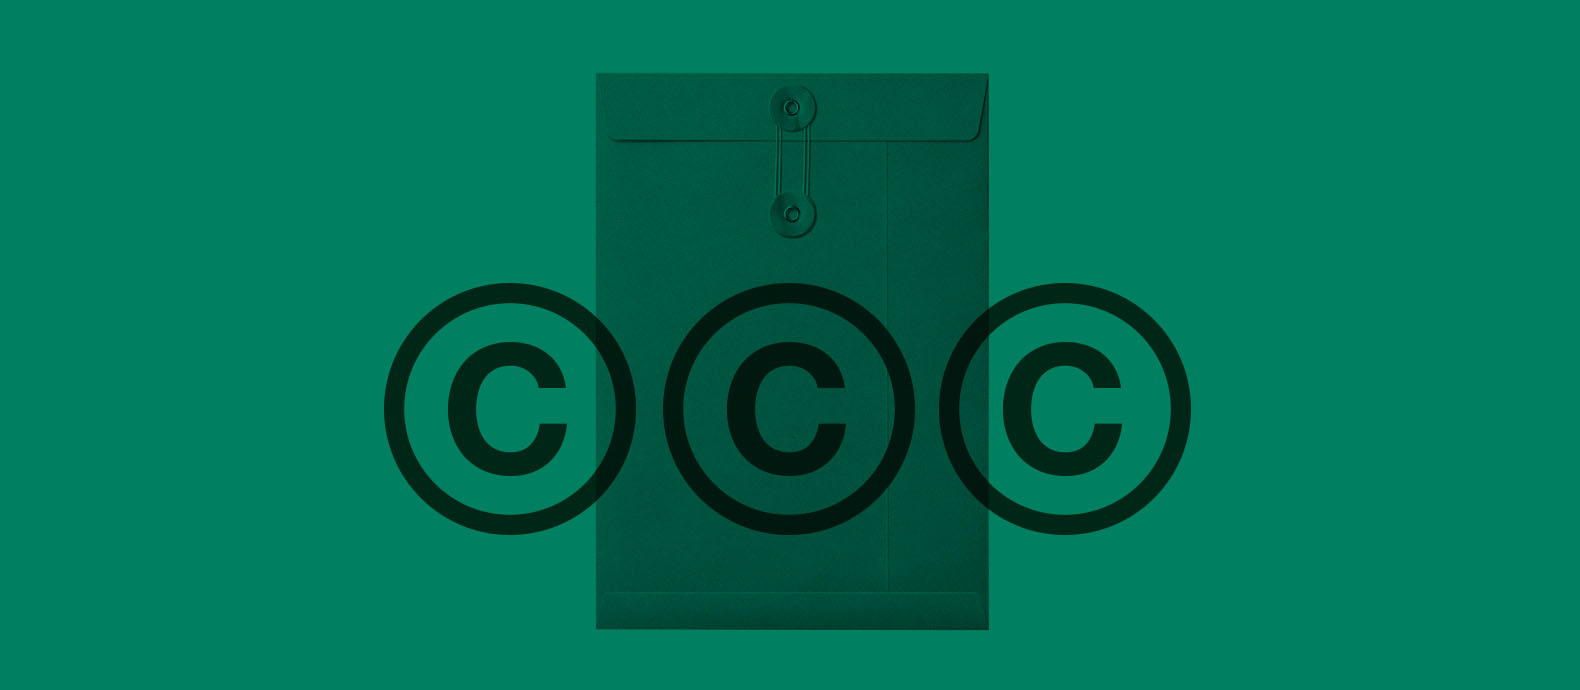 How to report a copyright infringement on Shopify